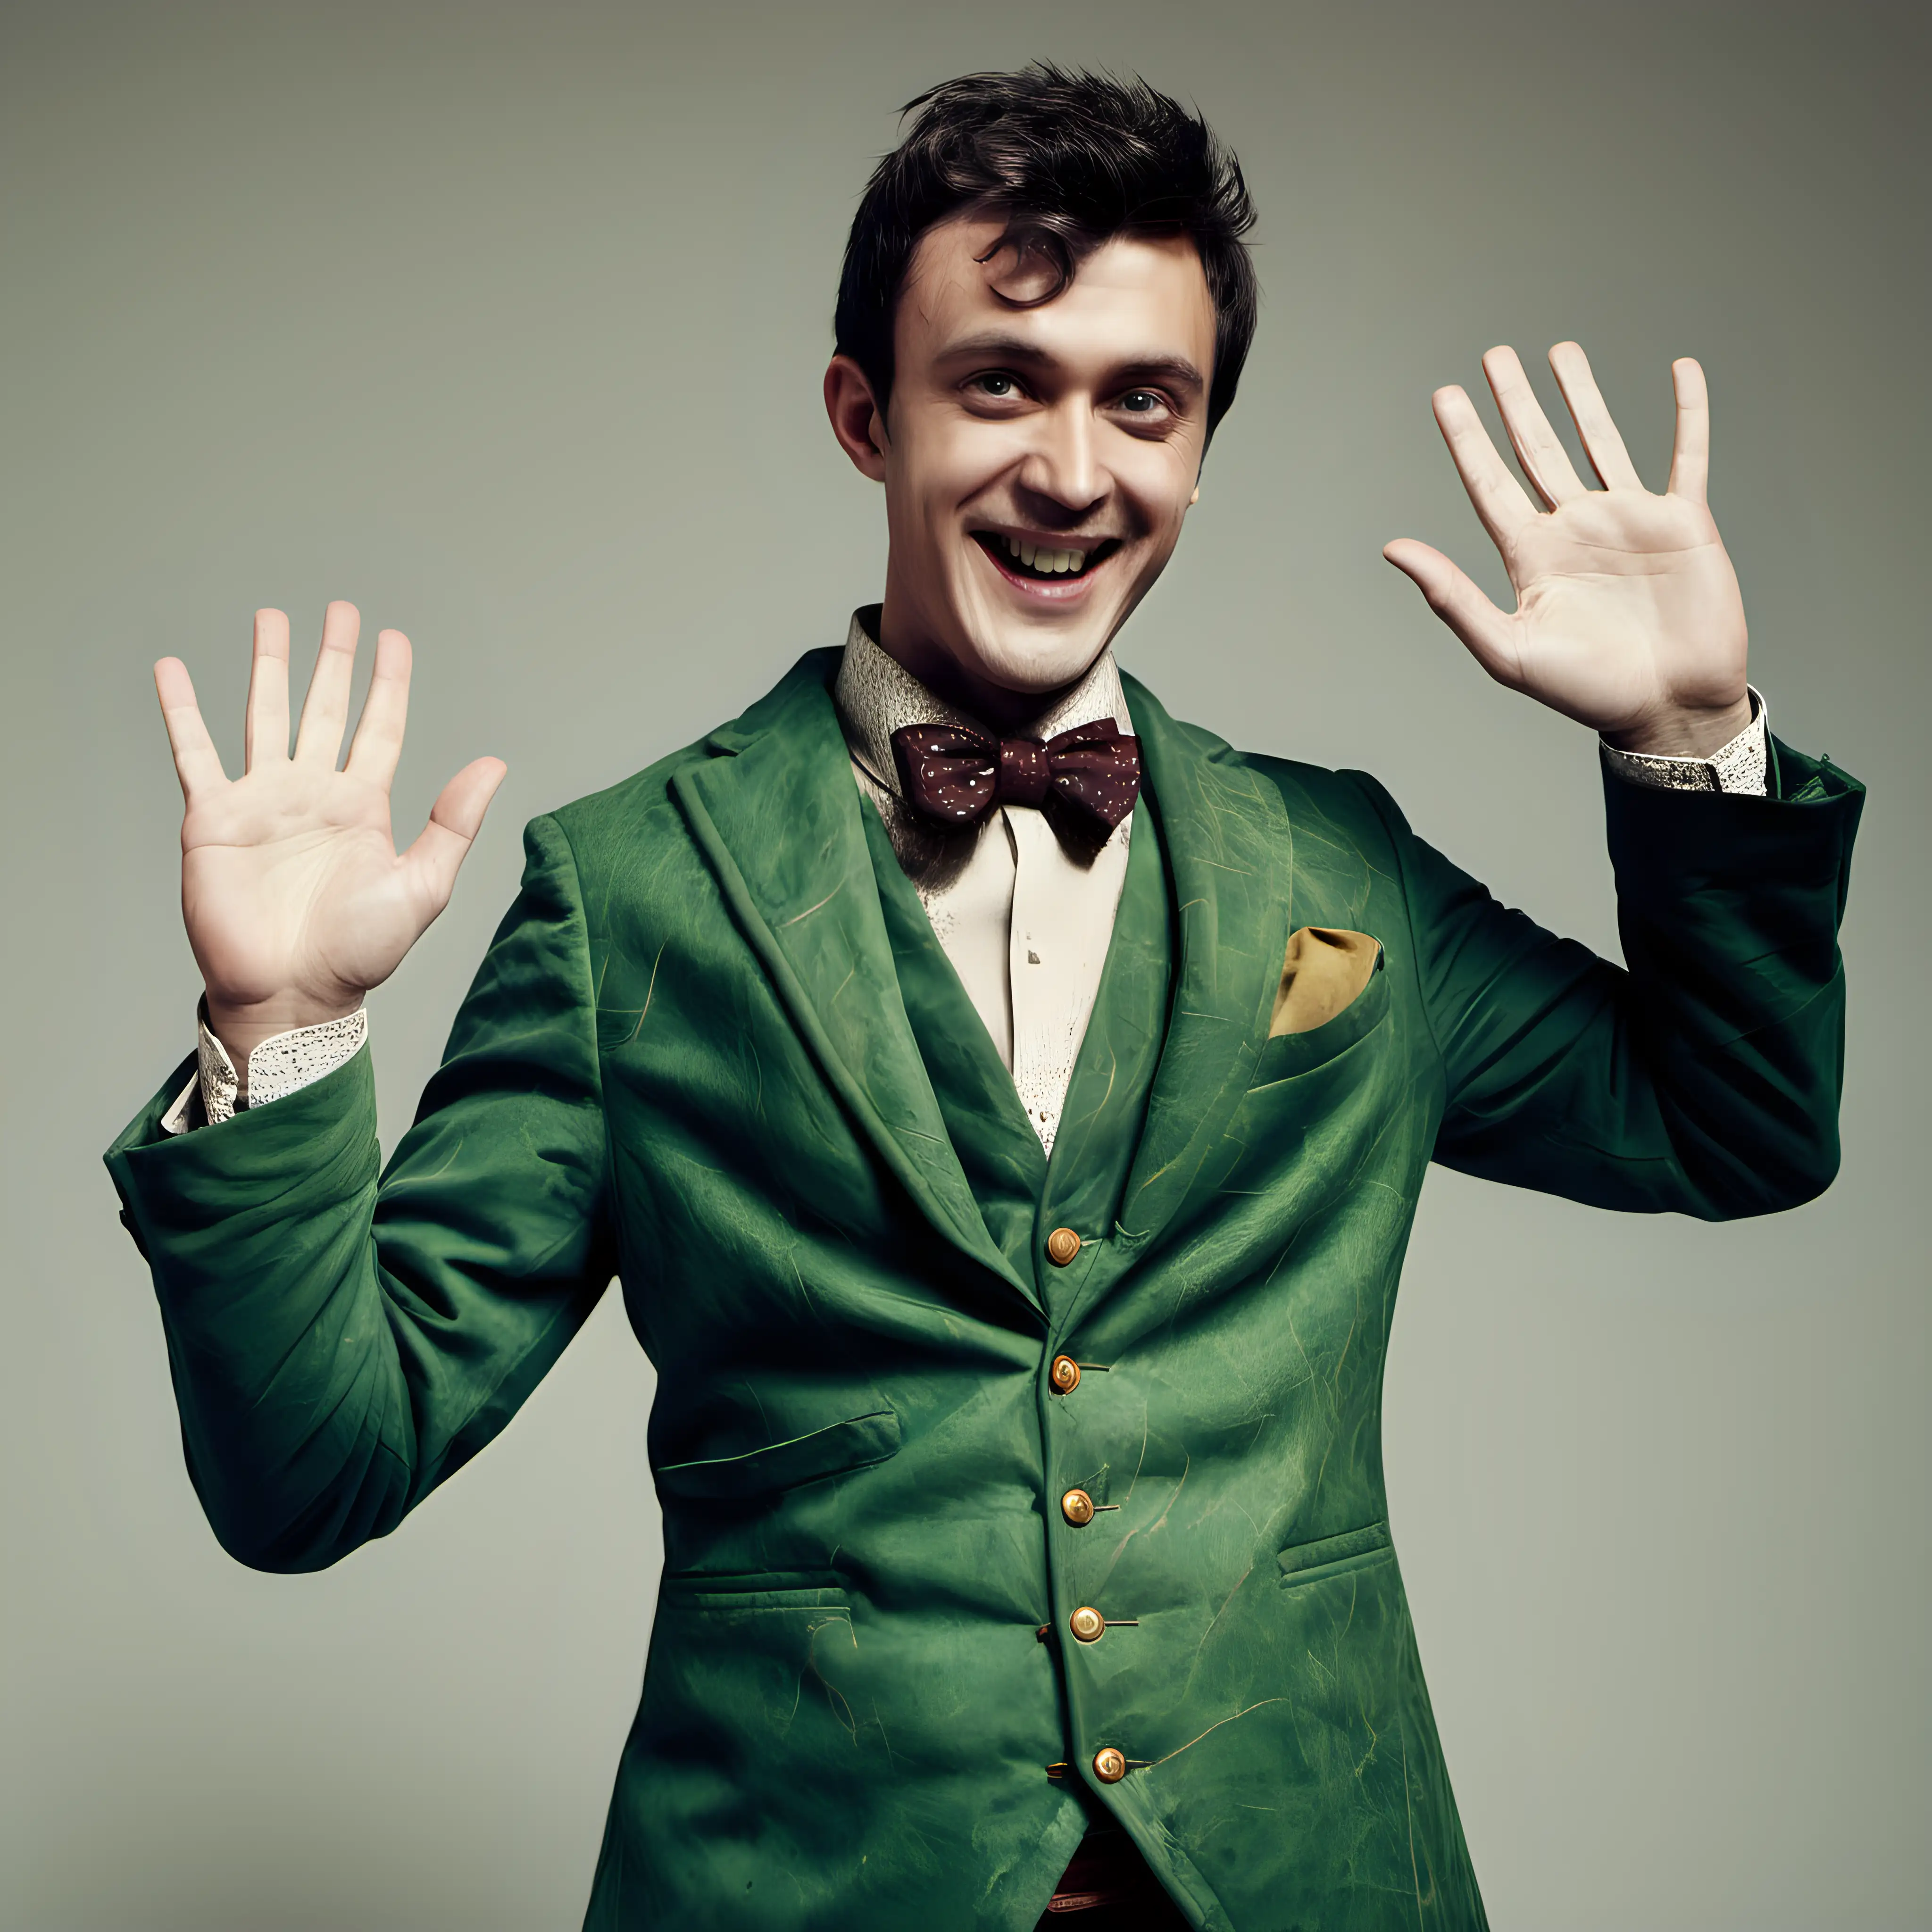 A man with both arms waving wearing a rustic green blazer and waistcoat.

